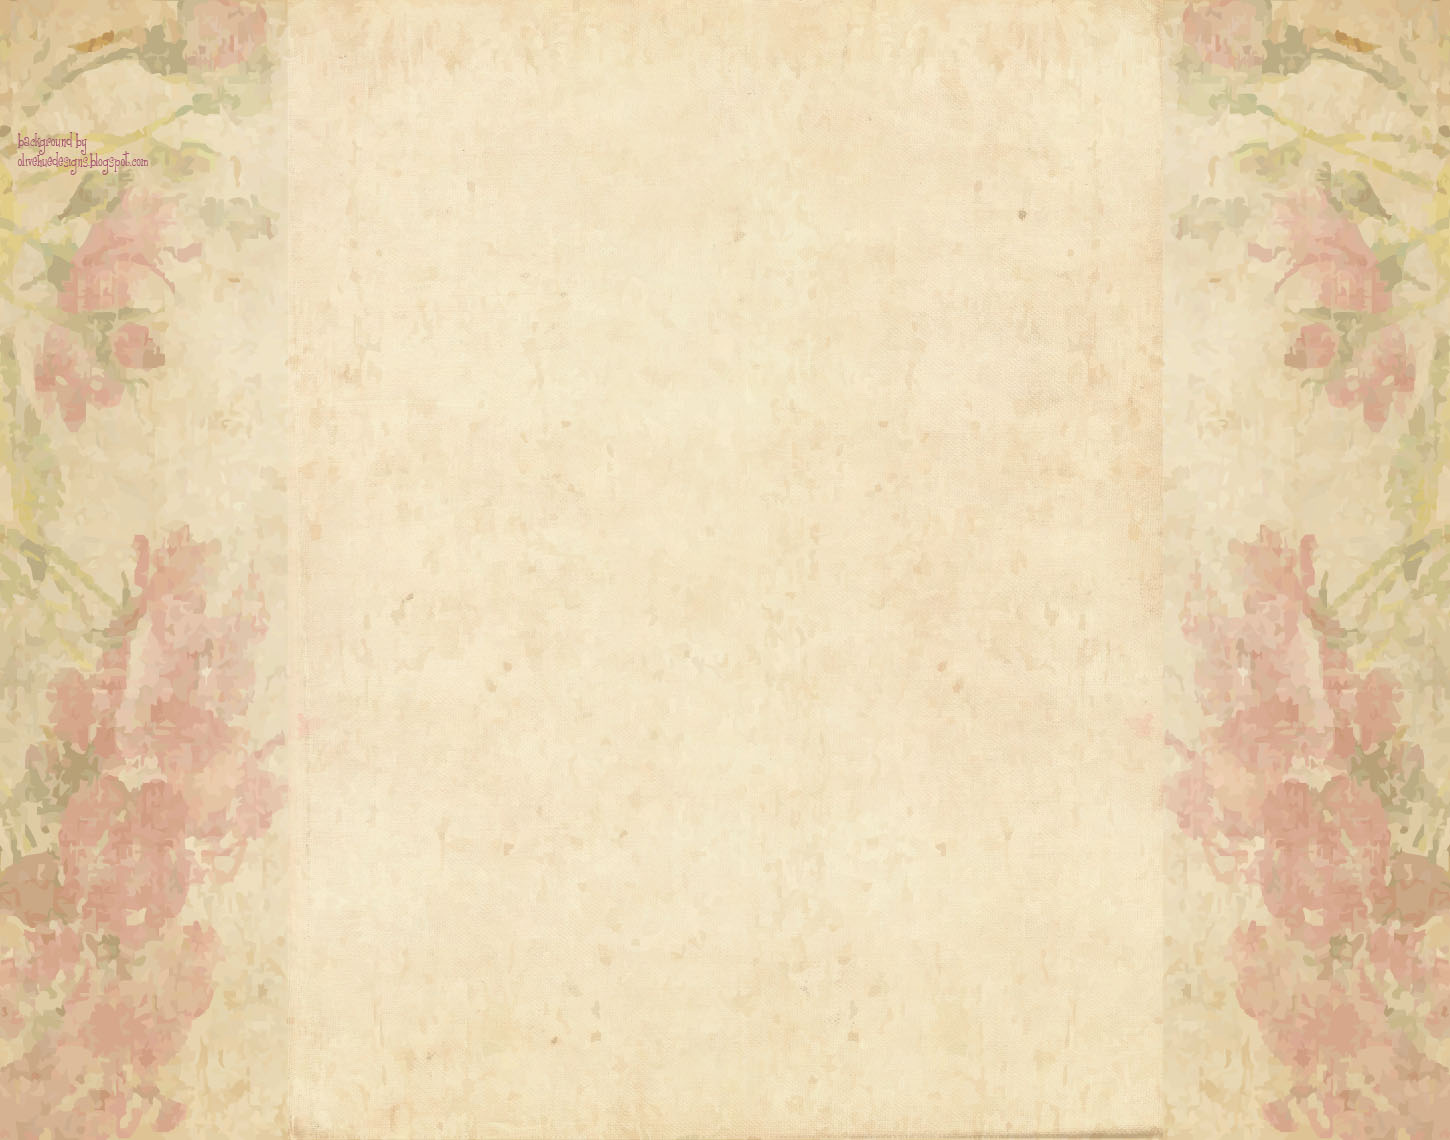 old crow backgrounds & designs: pink posies